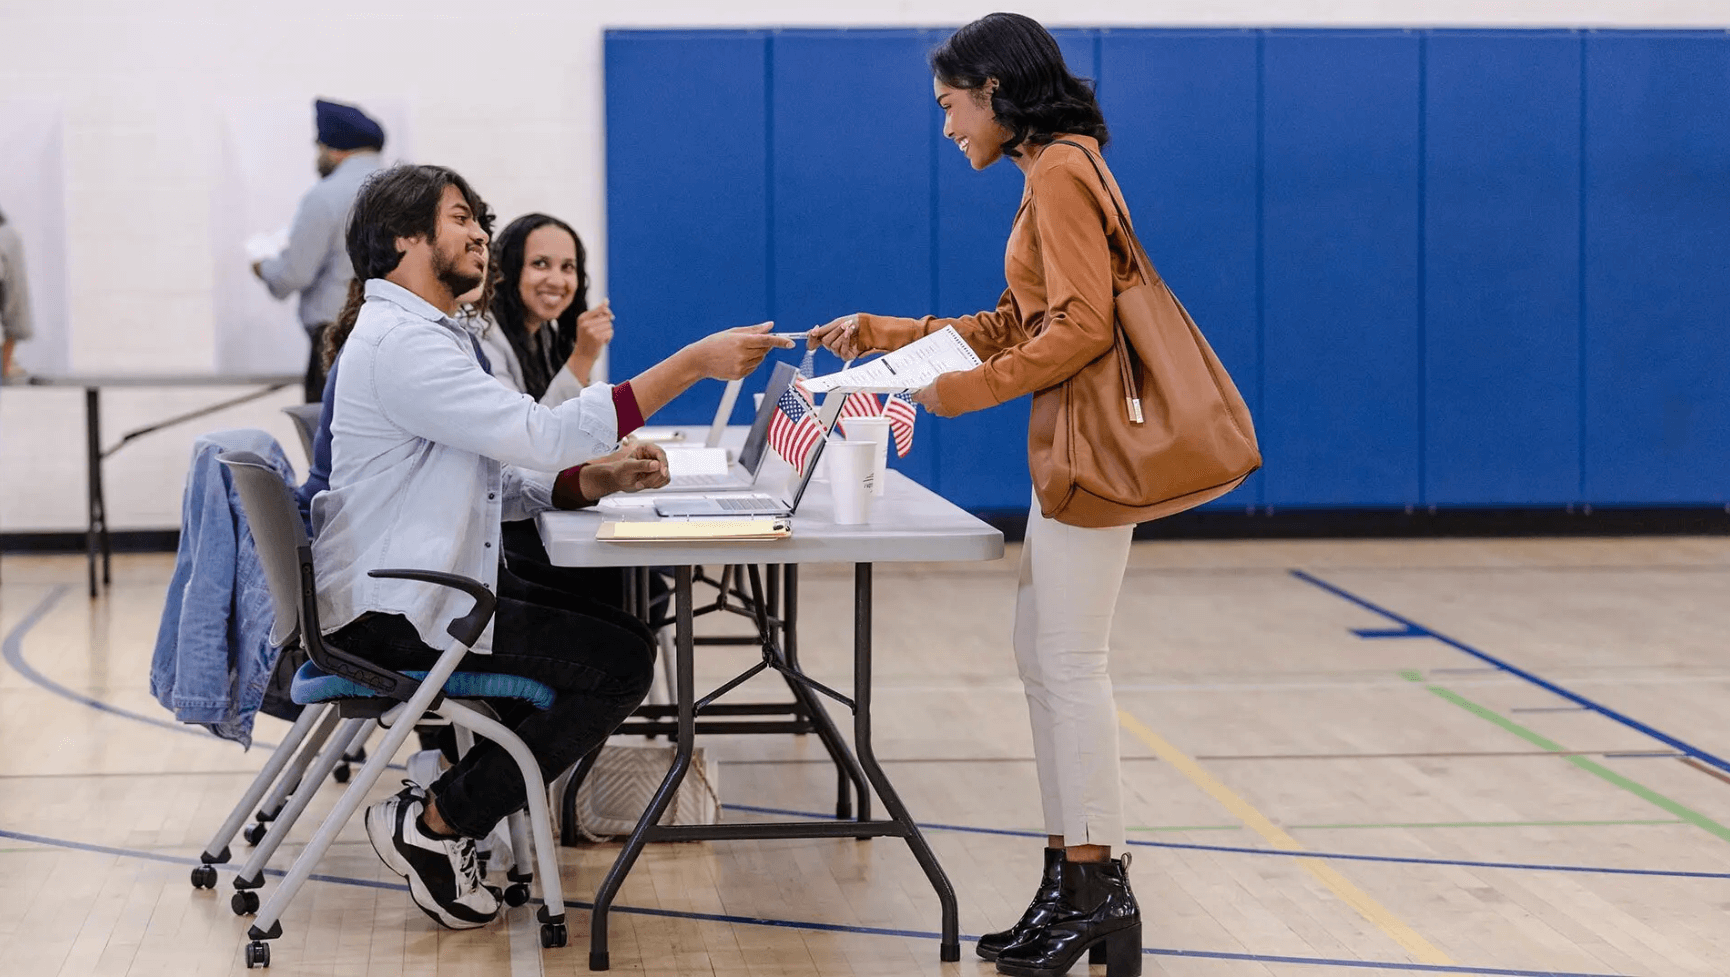 Students working as poll workers during an election.